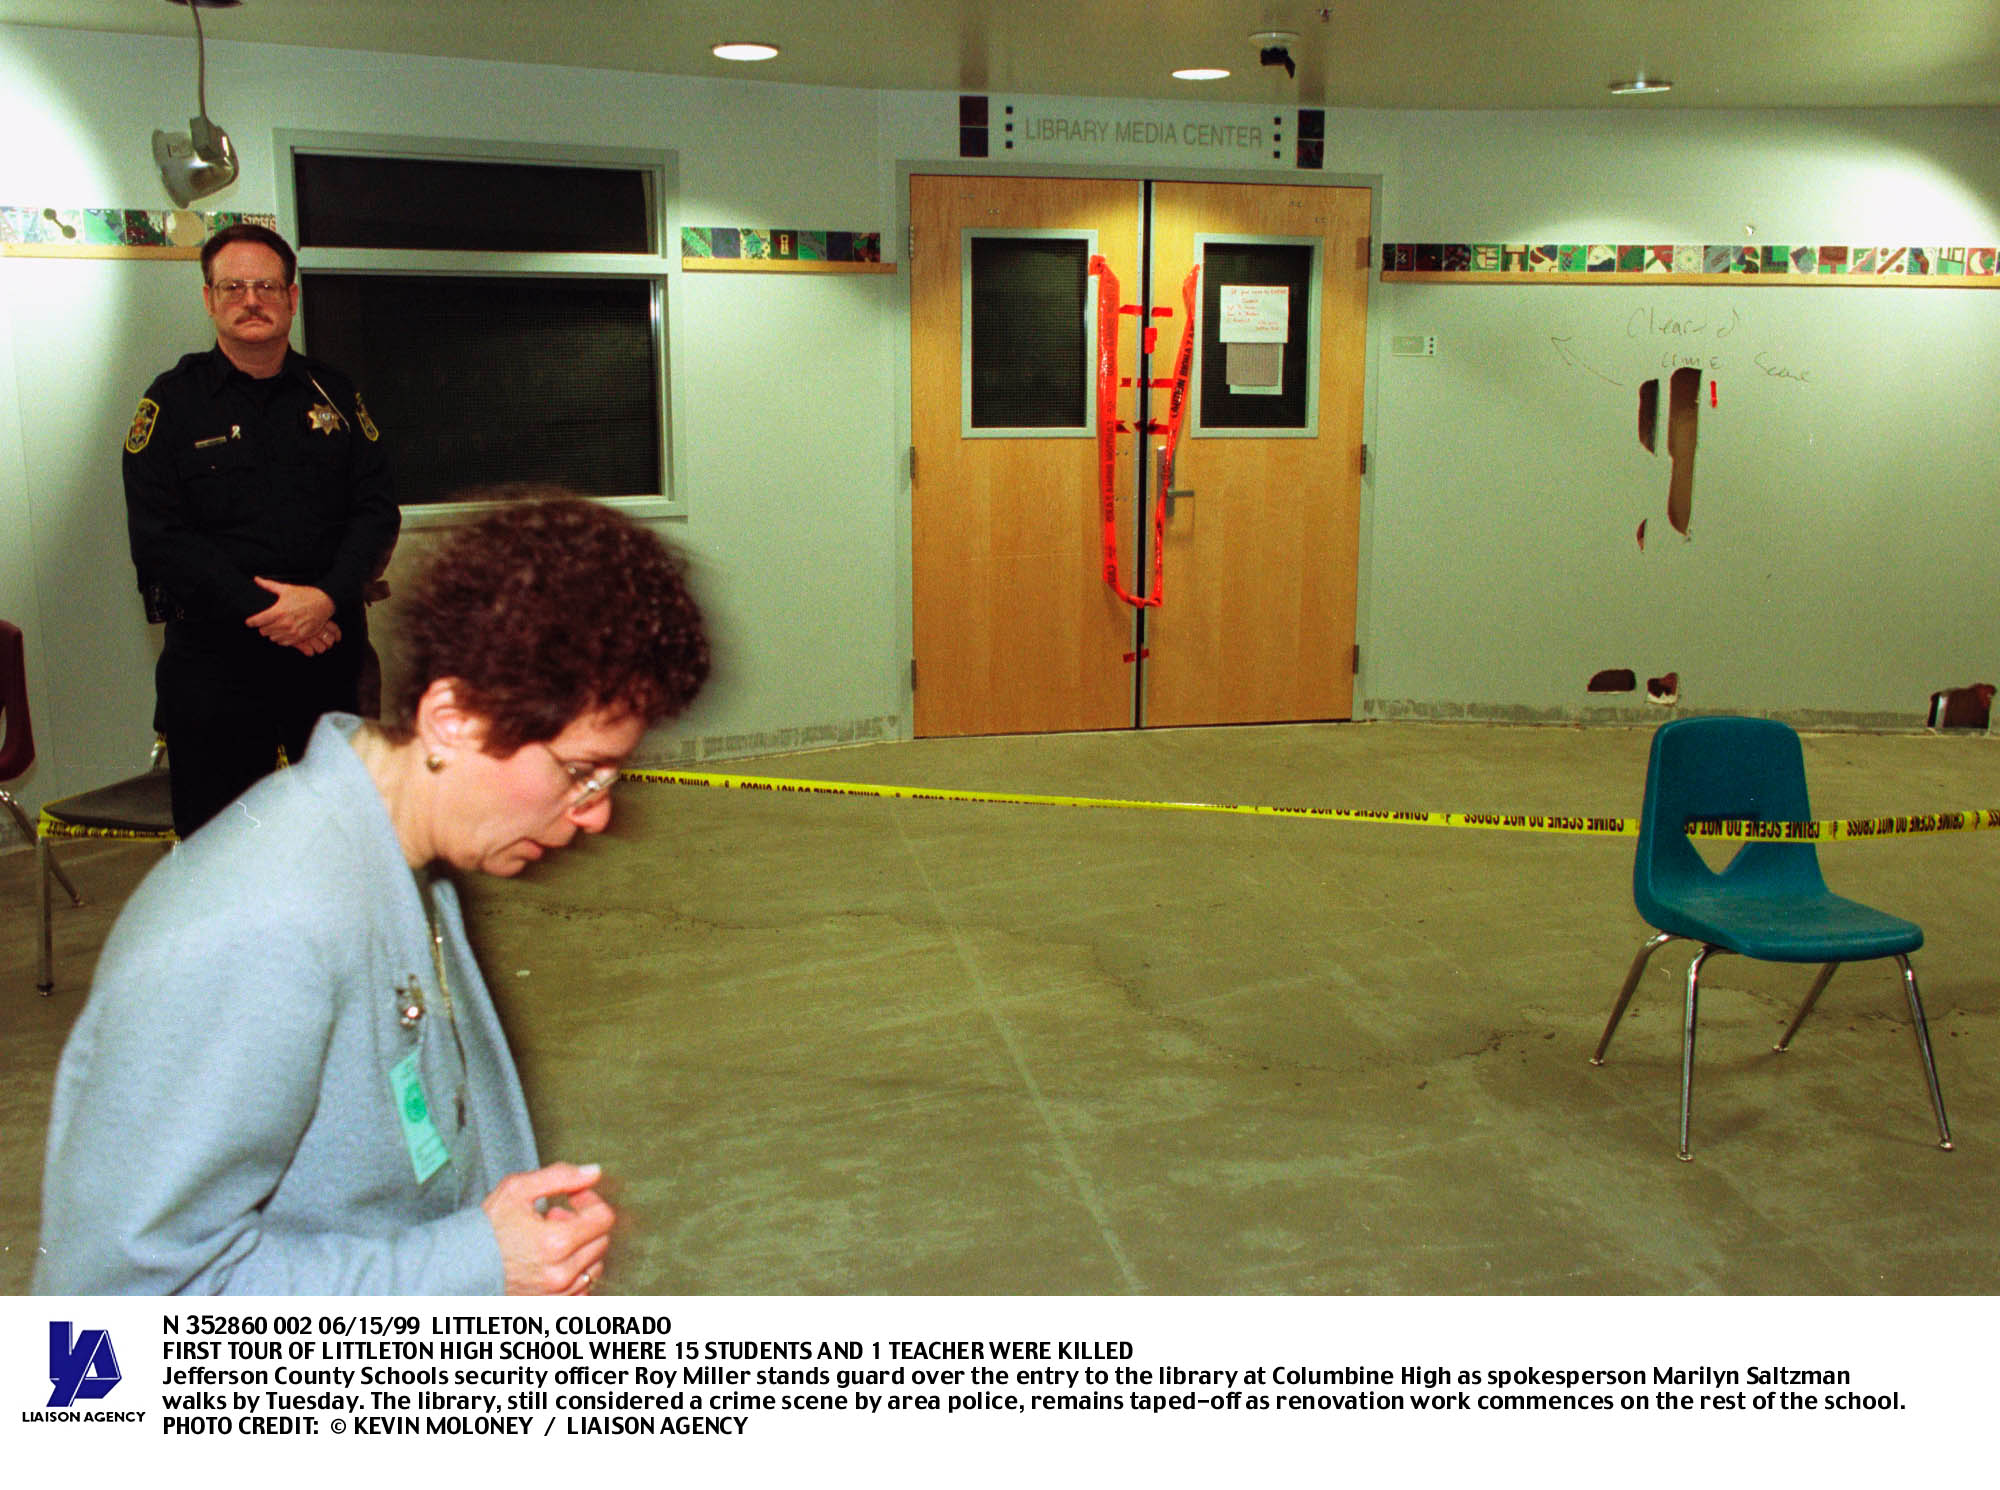 PHOTO: A security officer stands guard at the entrance to the Columbine High School library on June 15, 1999, nearly two months after the shooting.